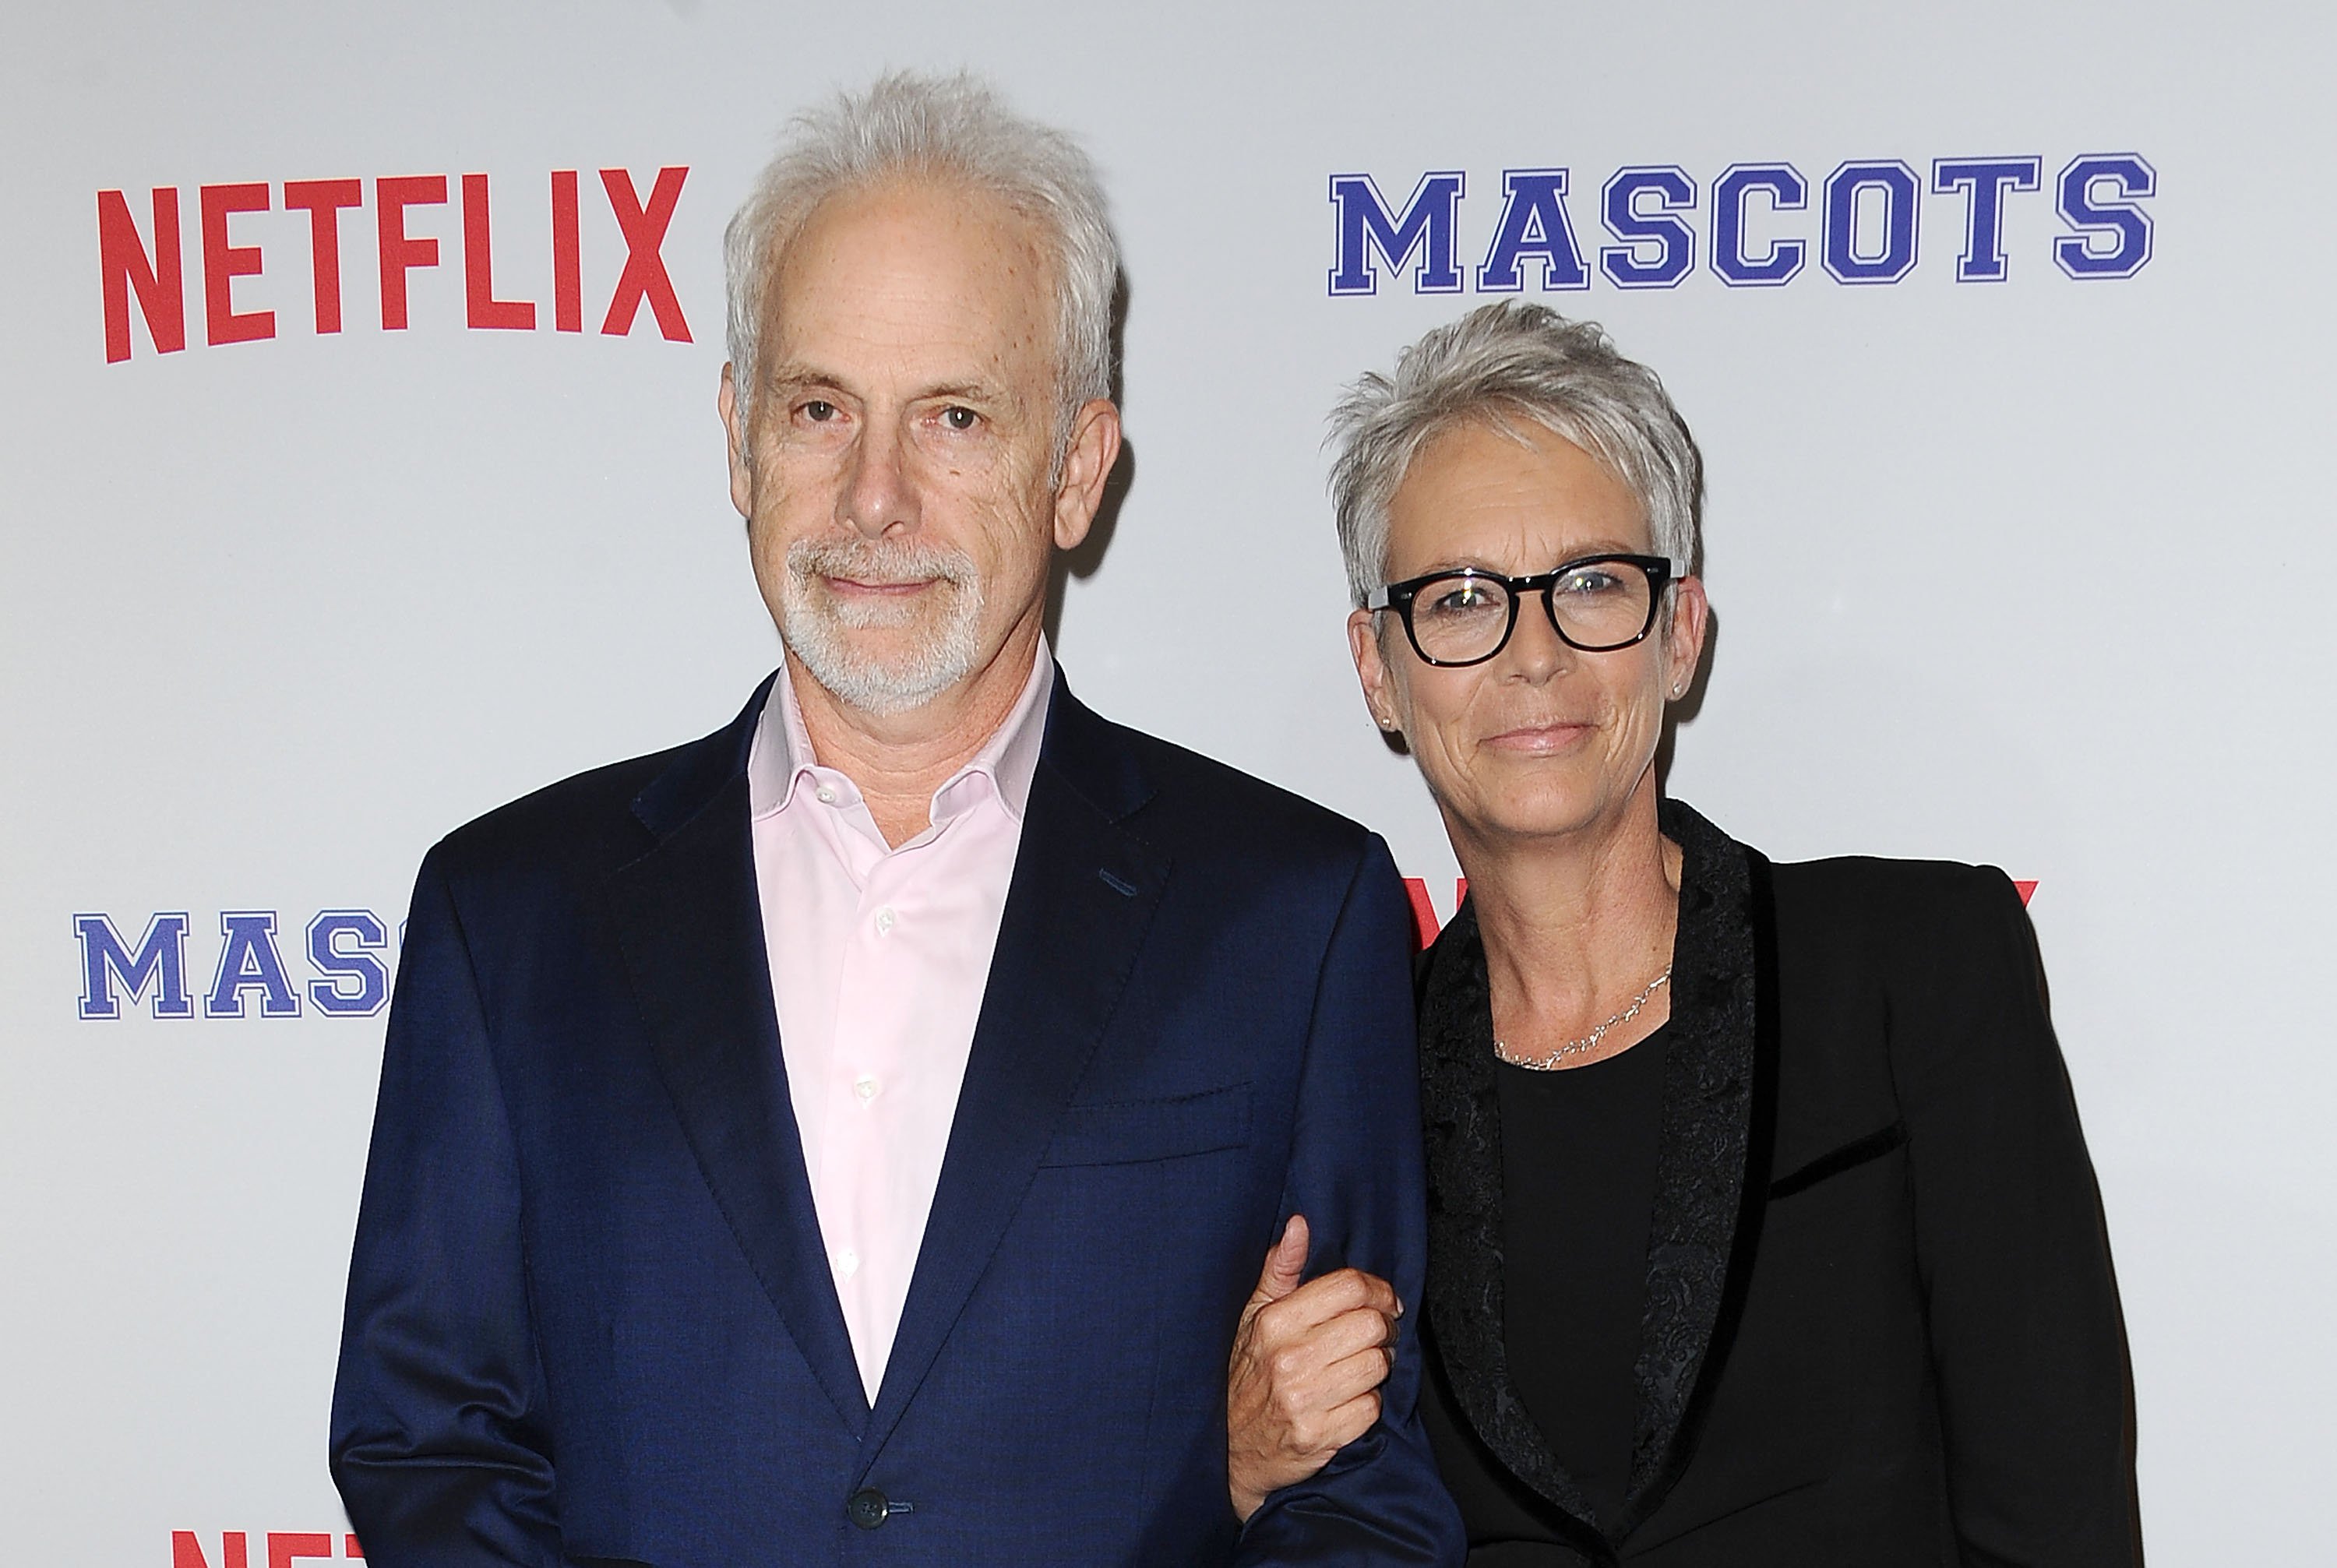 How Much Younger Is Jamie Lee Curtis Than Her Husband Christopher Guest?